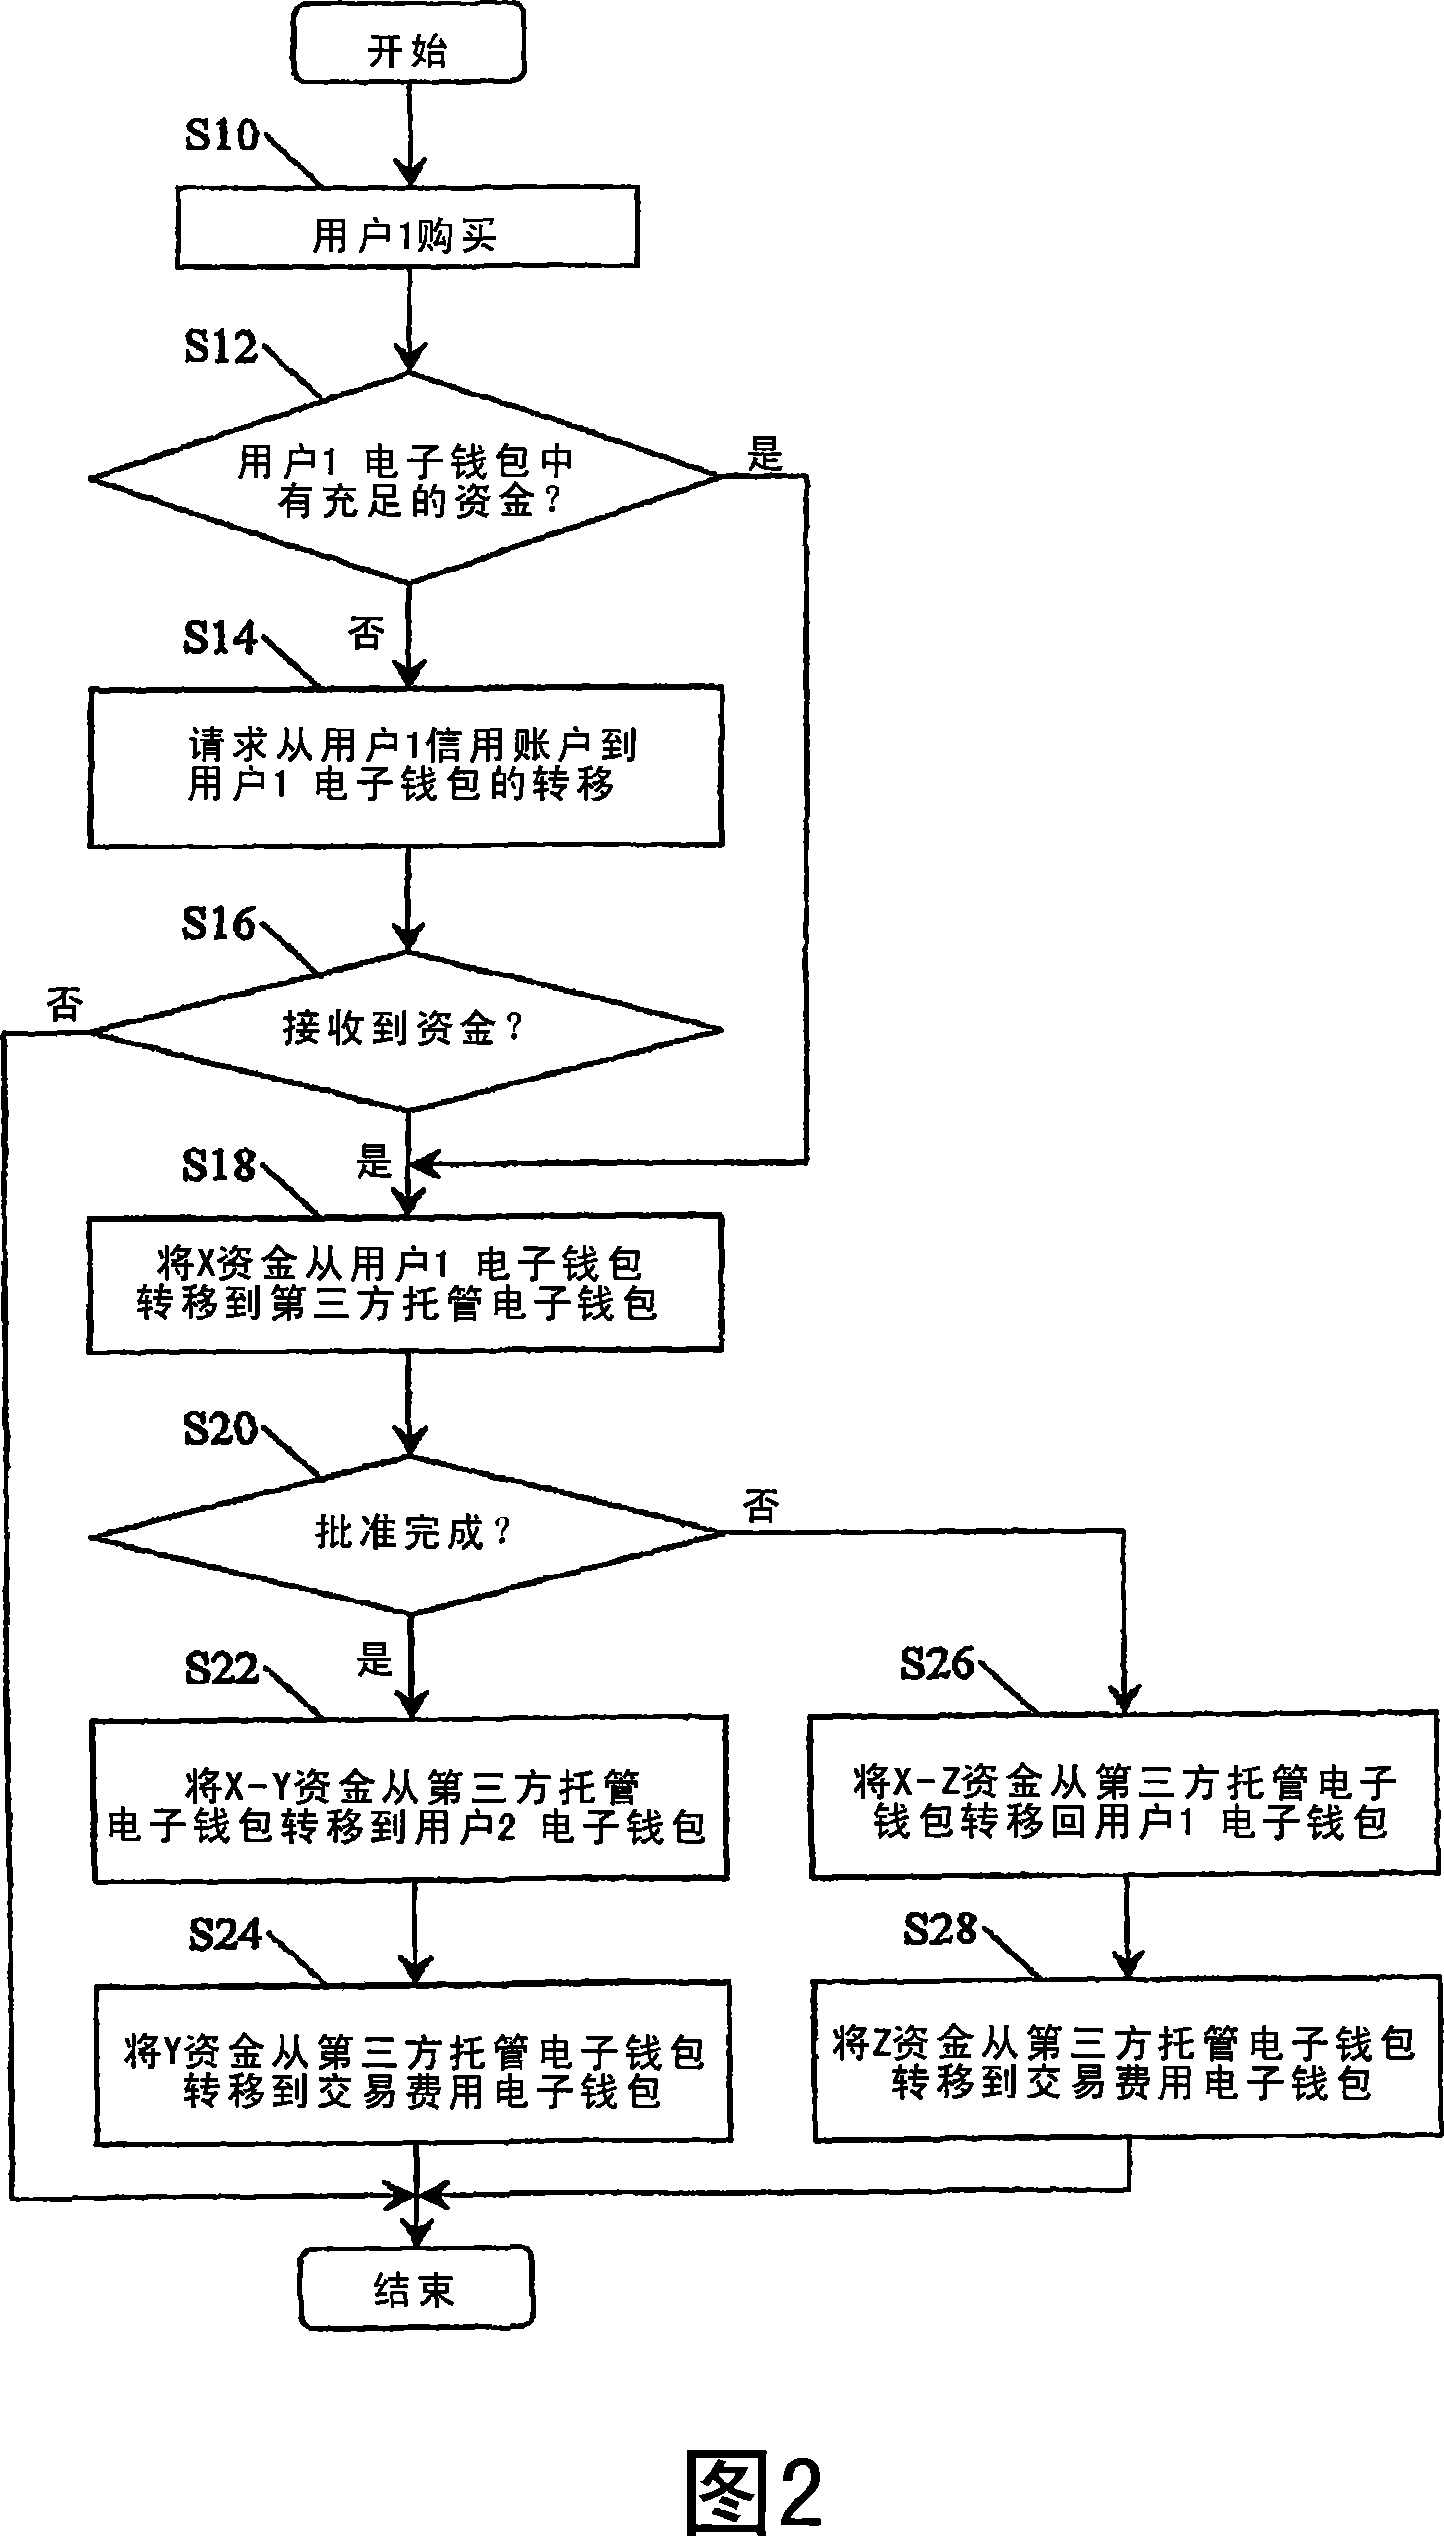 An electronic-purse transaction method and system